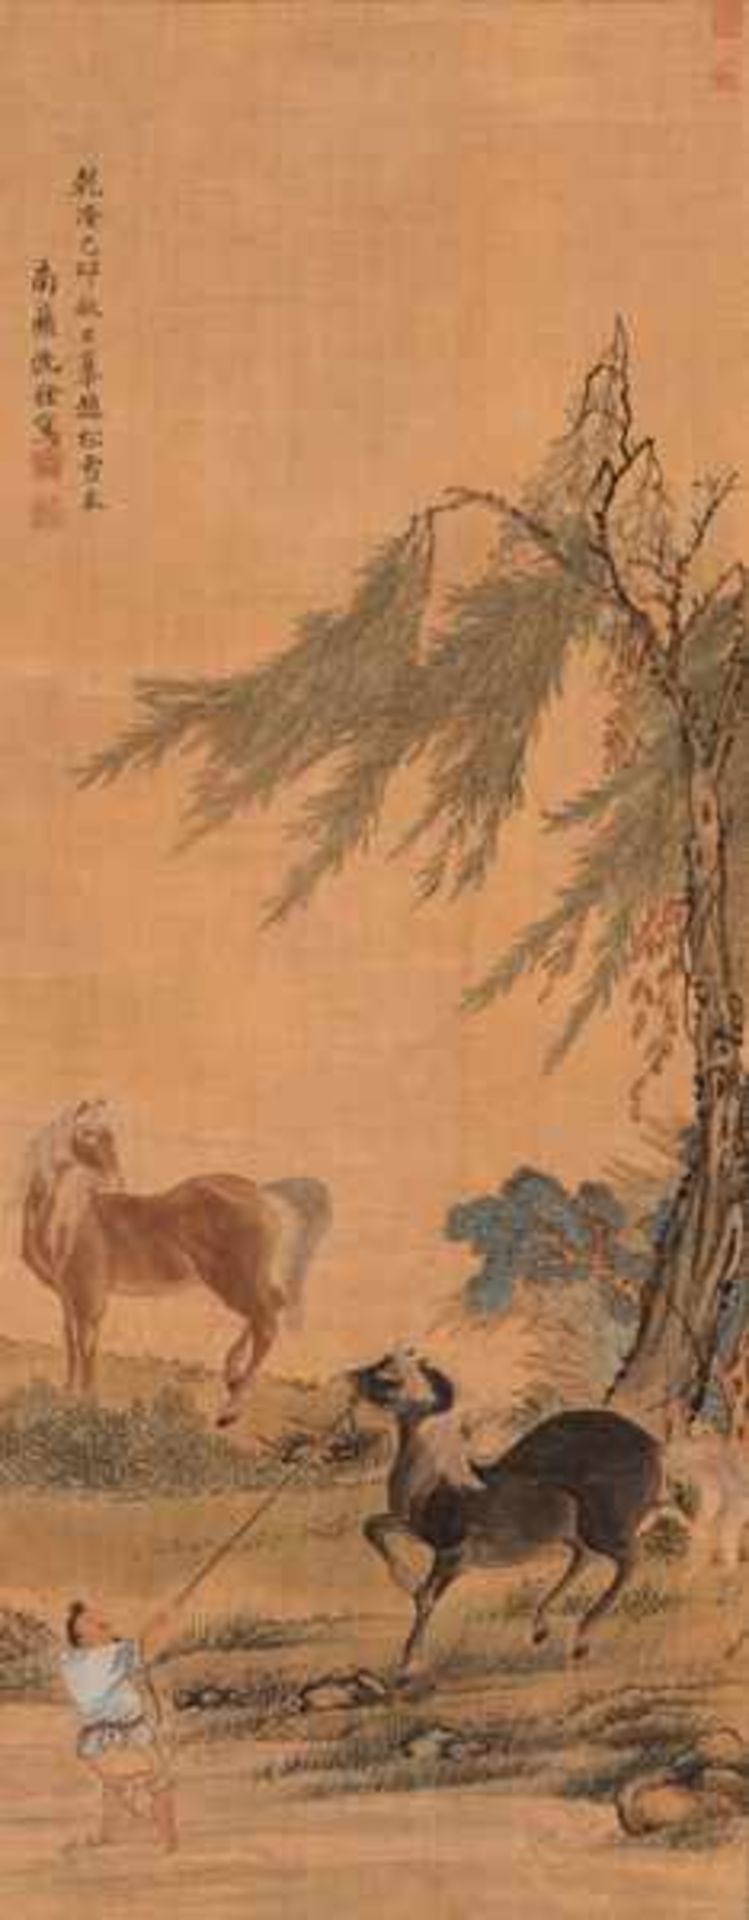 A KAKEMONO OF HORSES AND SERVANT UNDER A WILLOW Kakemono painting with colors on silk. Japan, 18th